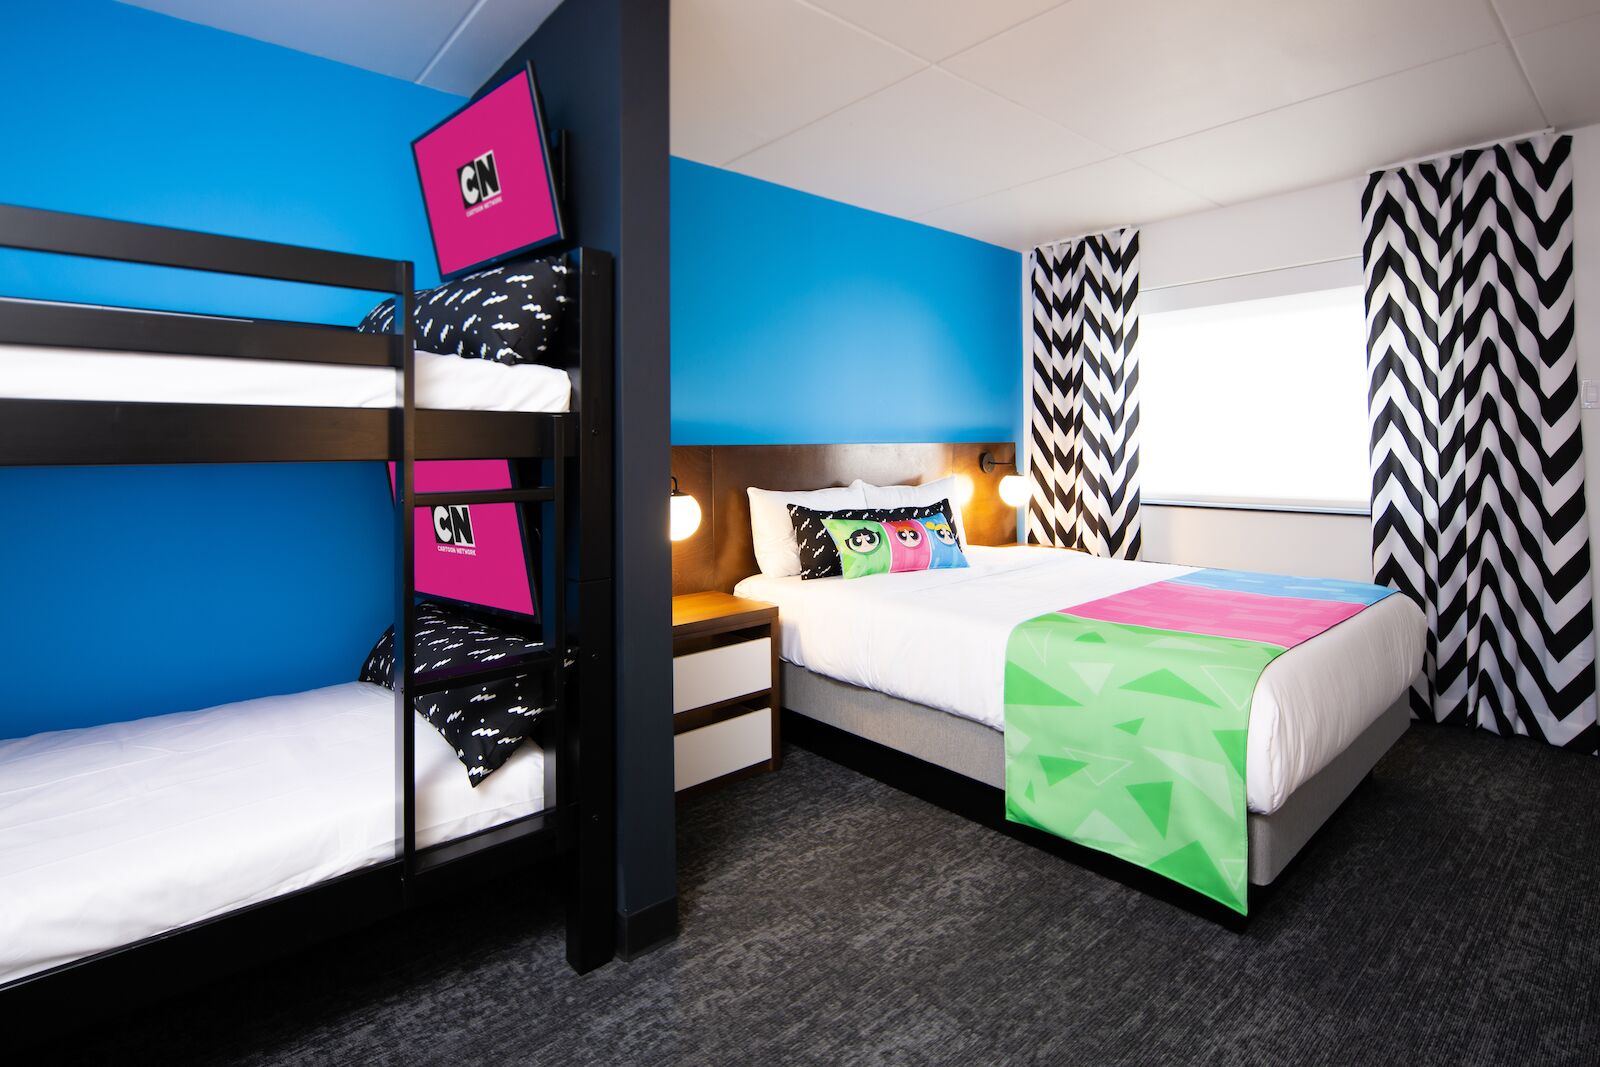 Suite for families at the Cartoon Network Hotel in Lancaster, PA